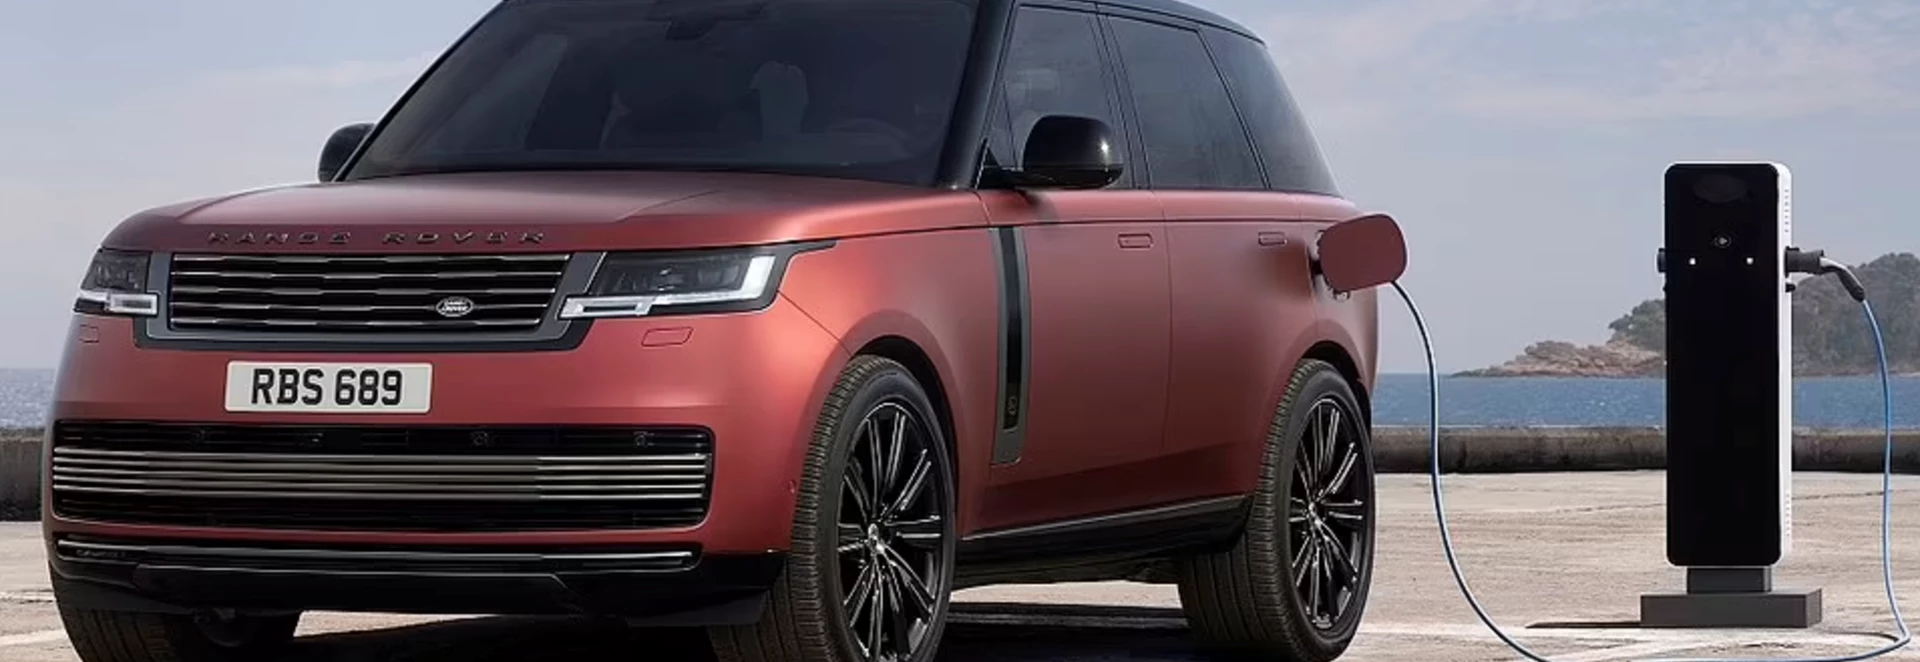 Land Rover's Electric Shift: Over 16,000 Eager for the New Electric Range Rover 